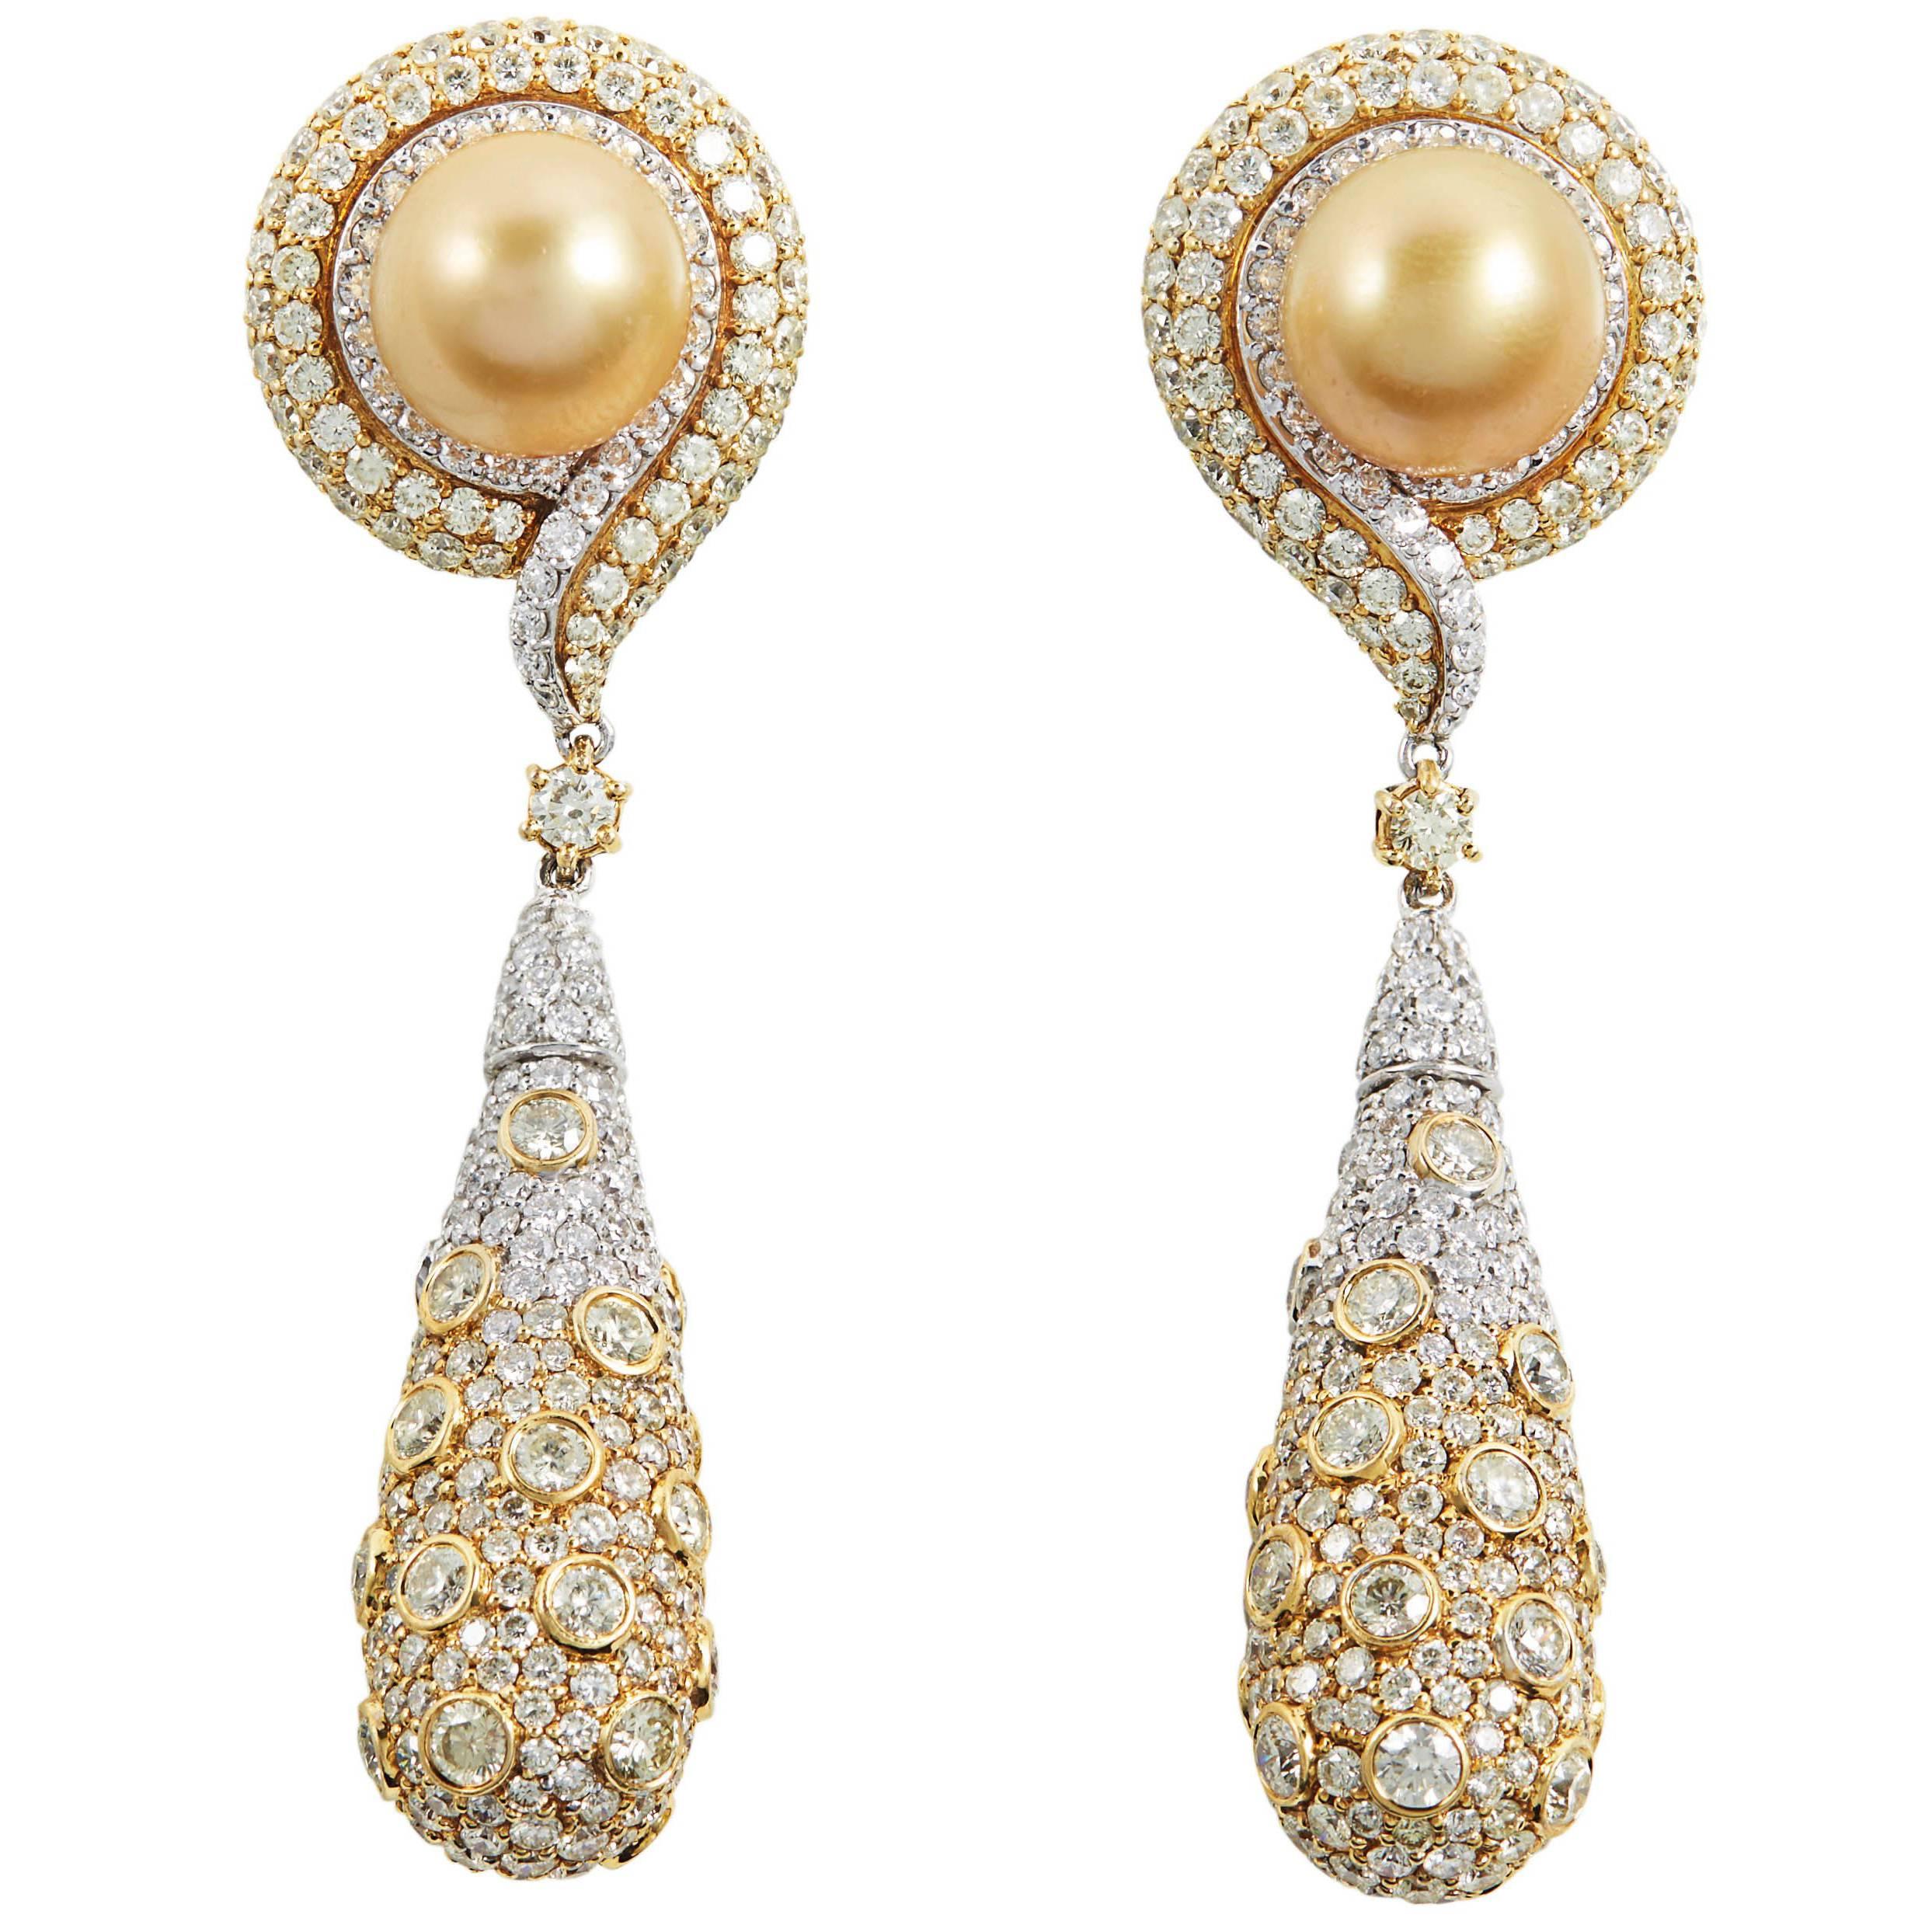 SAM.SAAB South Sea Pearl Diamond and Yellow Gold Drop Earring For Sale